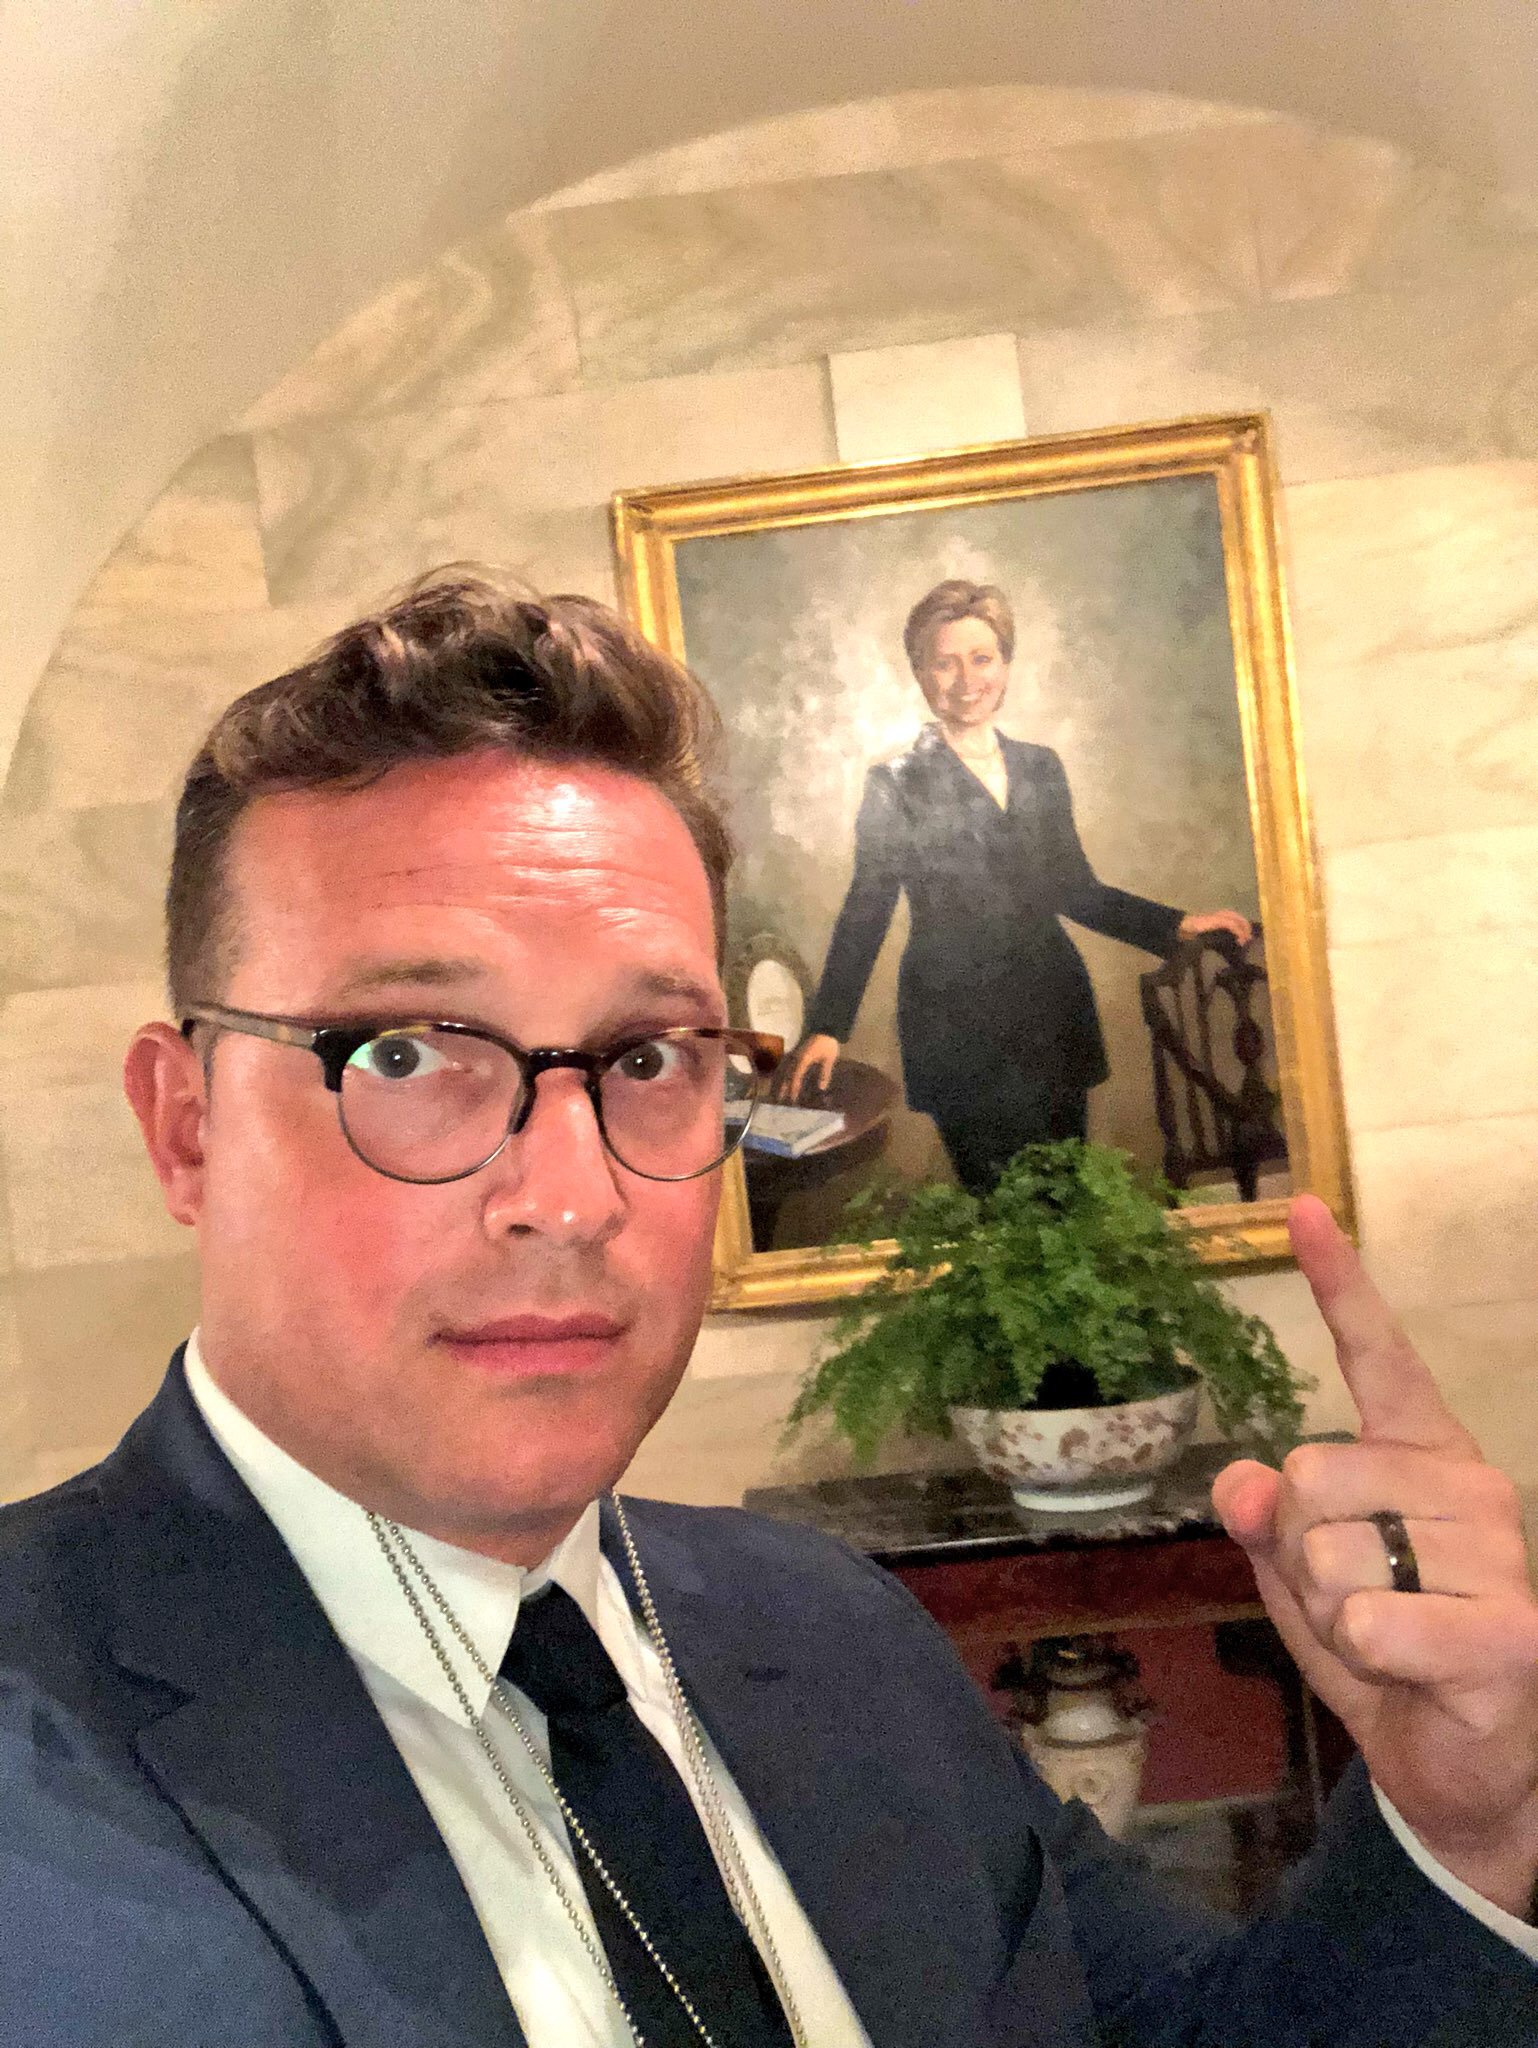 Benny takes a selfie by the Hillary portrait during the journey to the SCOTUS annoucement. Photo credit to Benny Johnson at The Daily Caller. 